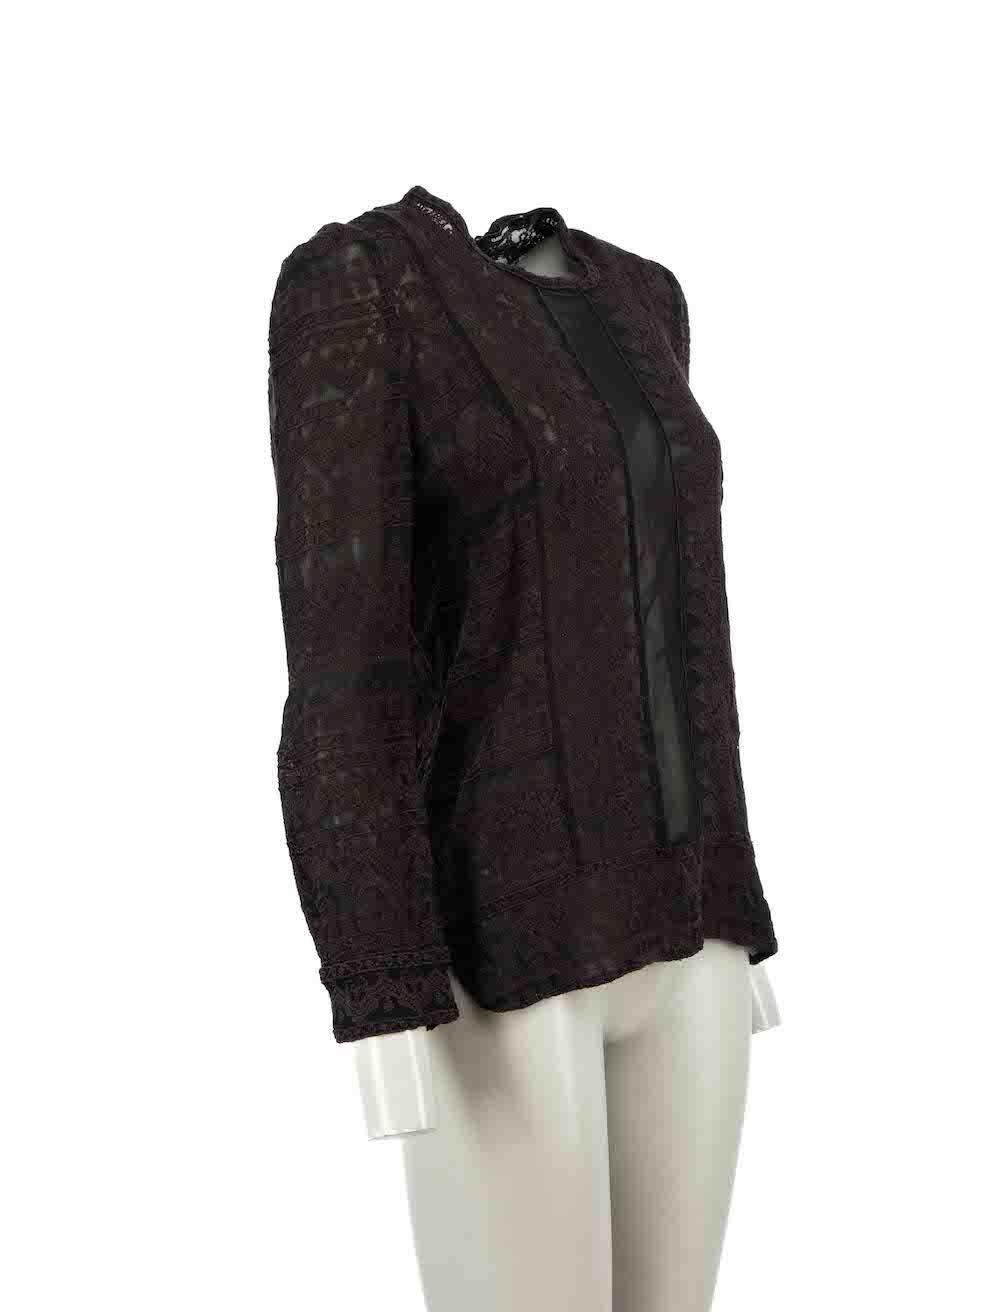 CONDITION is Very good. Minimal wear to top is evident. Minimal wear to the rear hook and eye fastening with the hook coming loose and there are pulls to the overall embroidery on this used Isabel Marant designer resale item.
